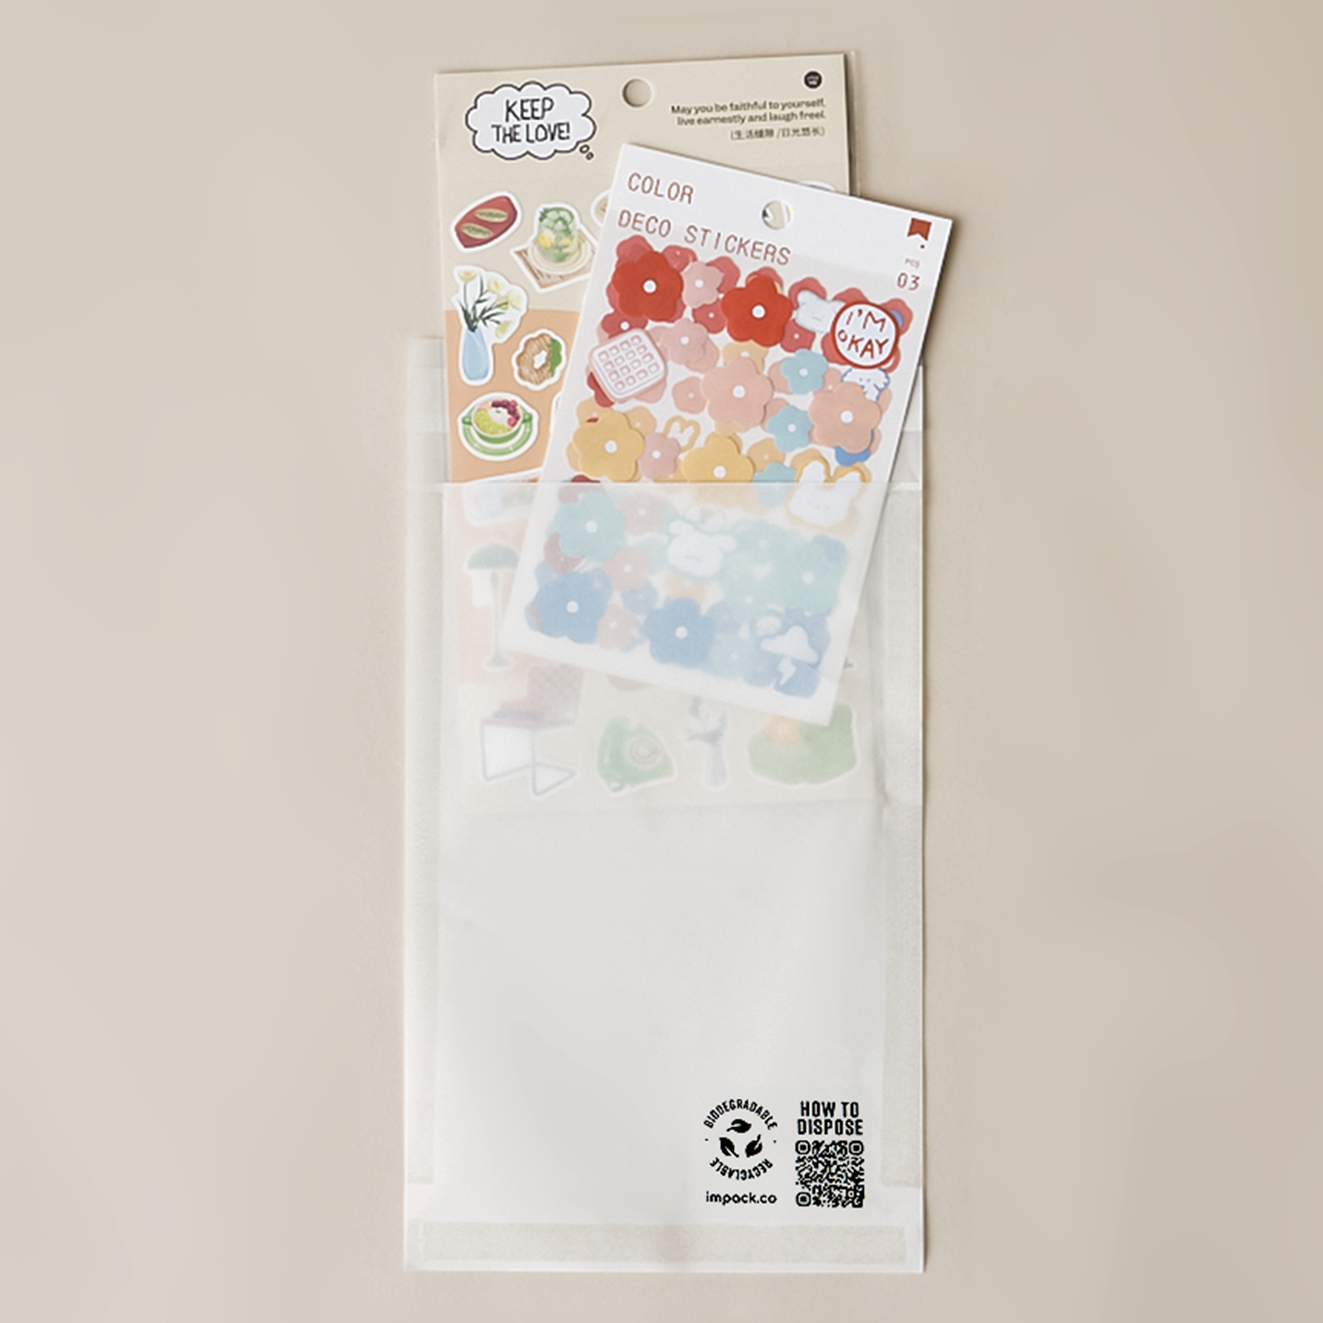 Two packs of decorative stickers featuring fruits, vegetables, and flowers on top of an impack.co Glassine Bags 5.6" x 8.6" with a 'How to Dispose' QR code at the bottom.